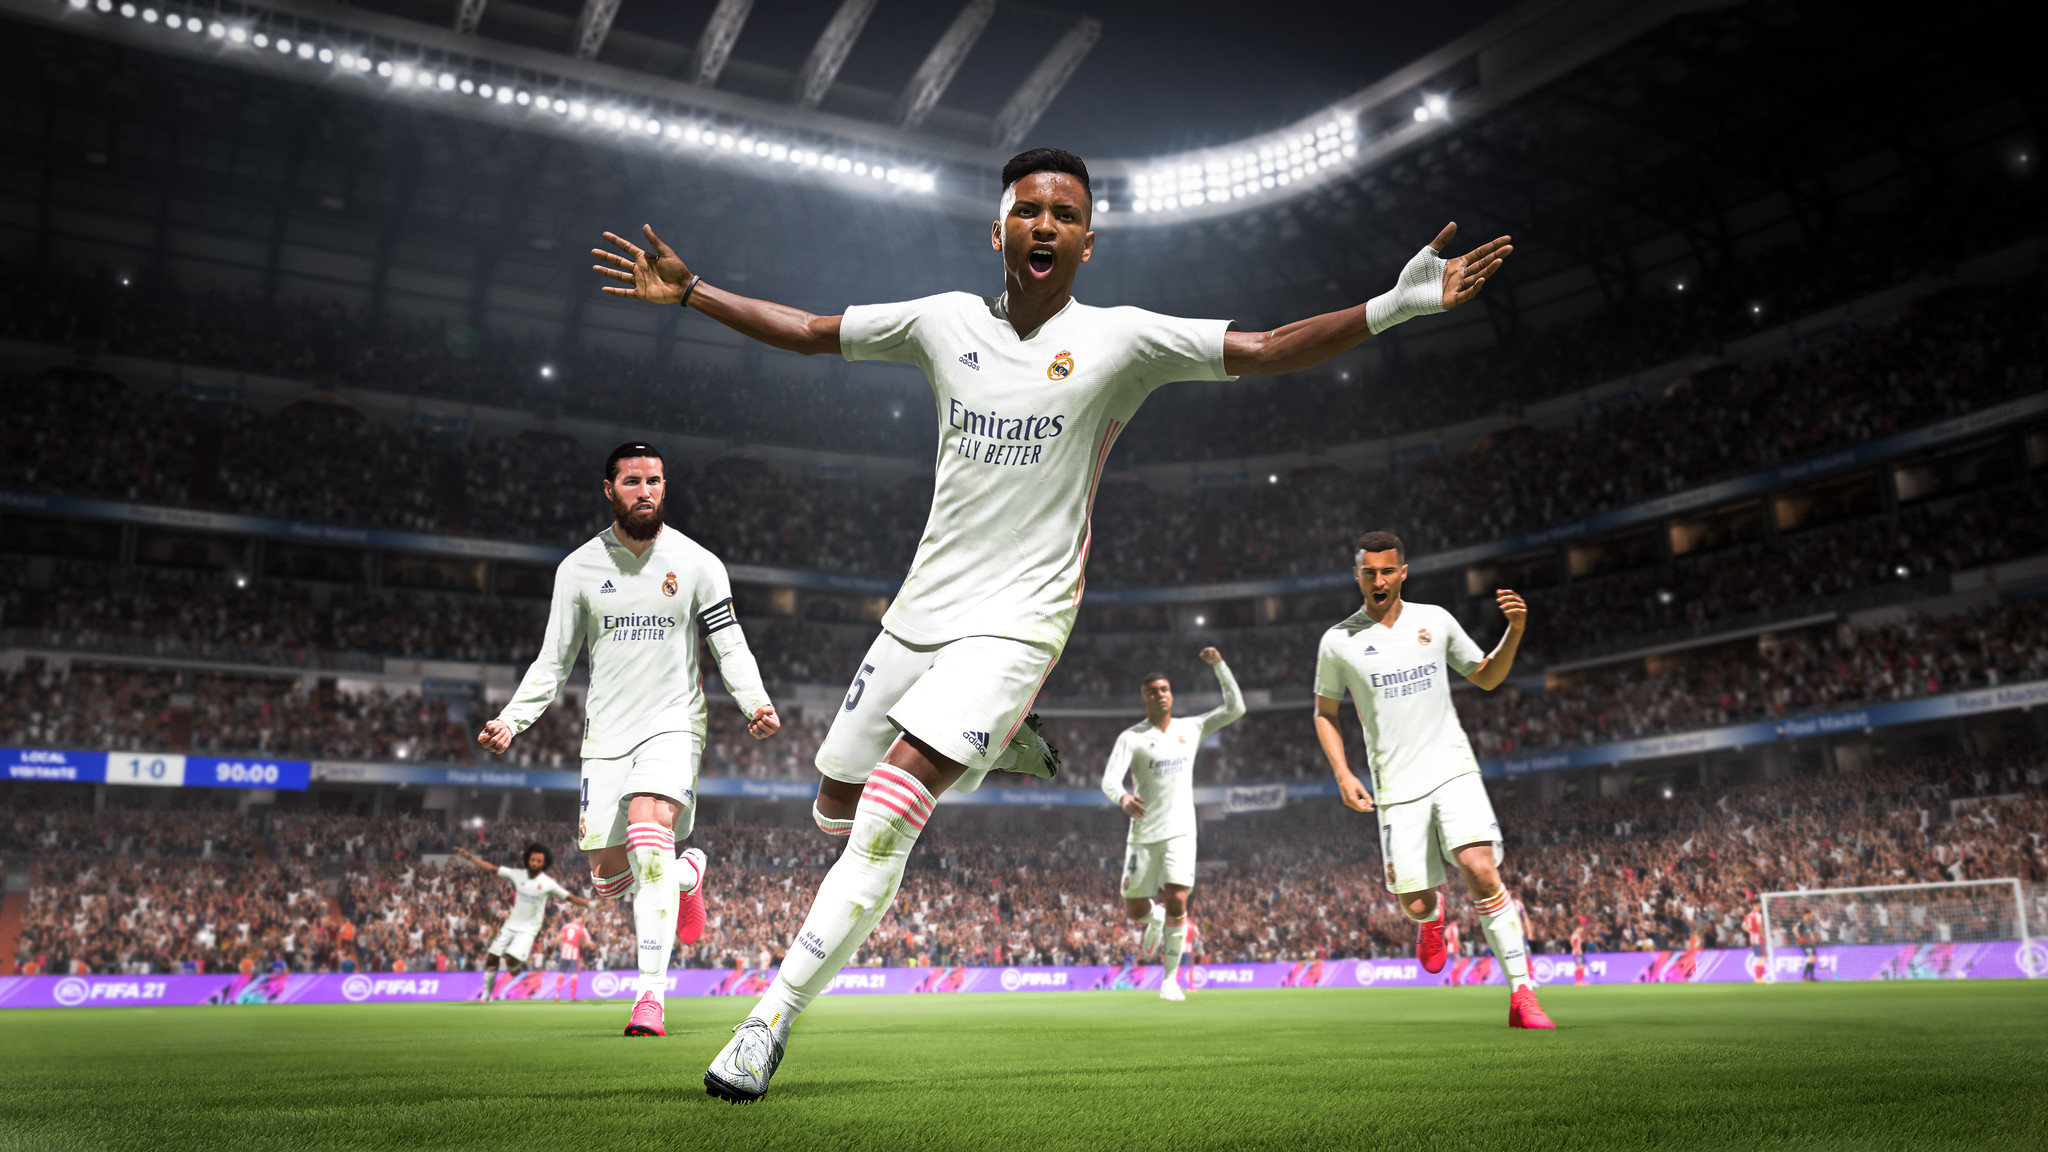 Tutorial how to download fifa 21 ultimate edition for FREE! #fifa21 #